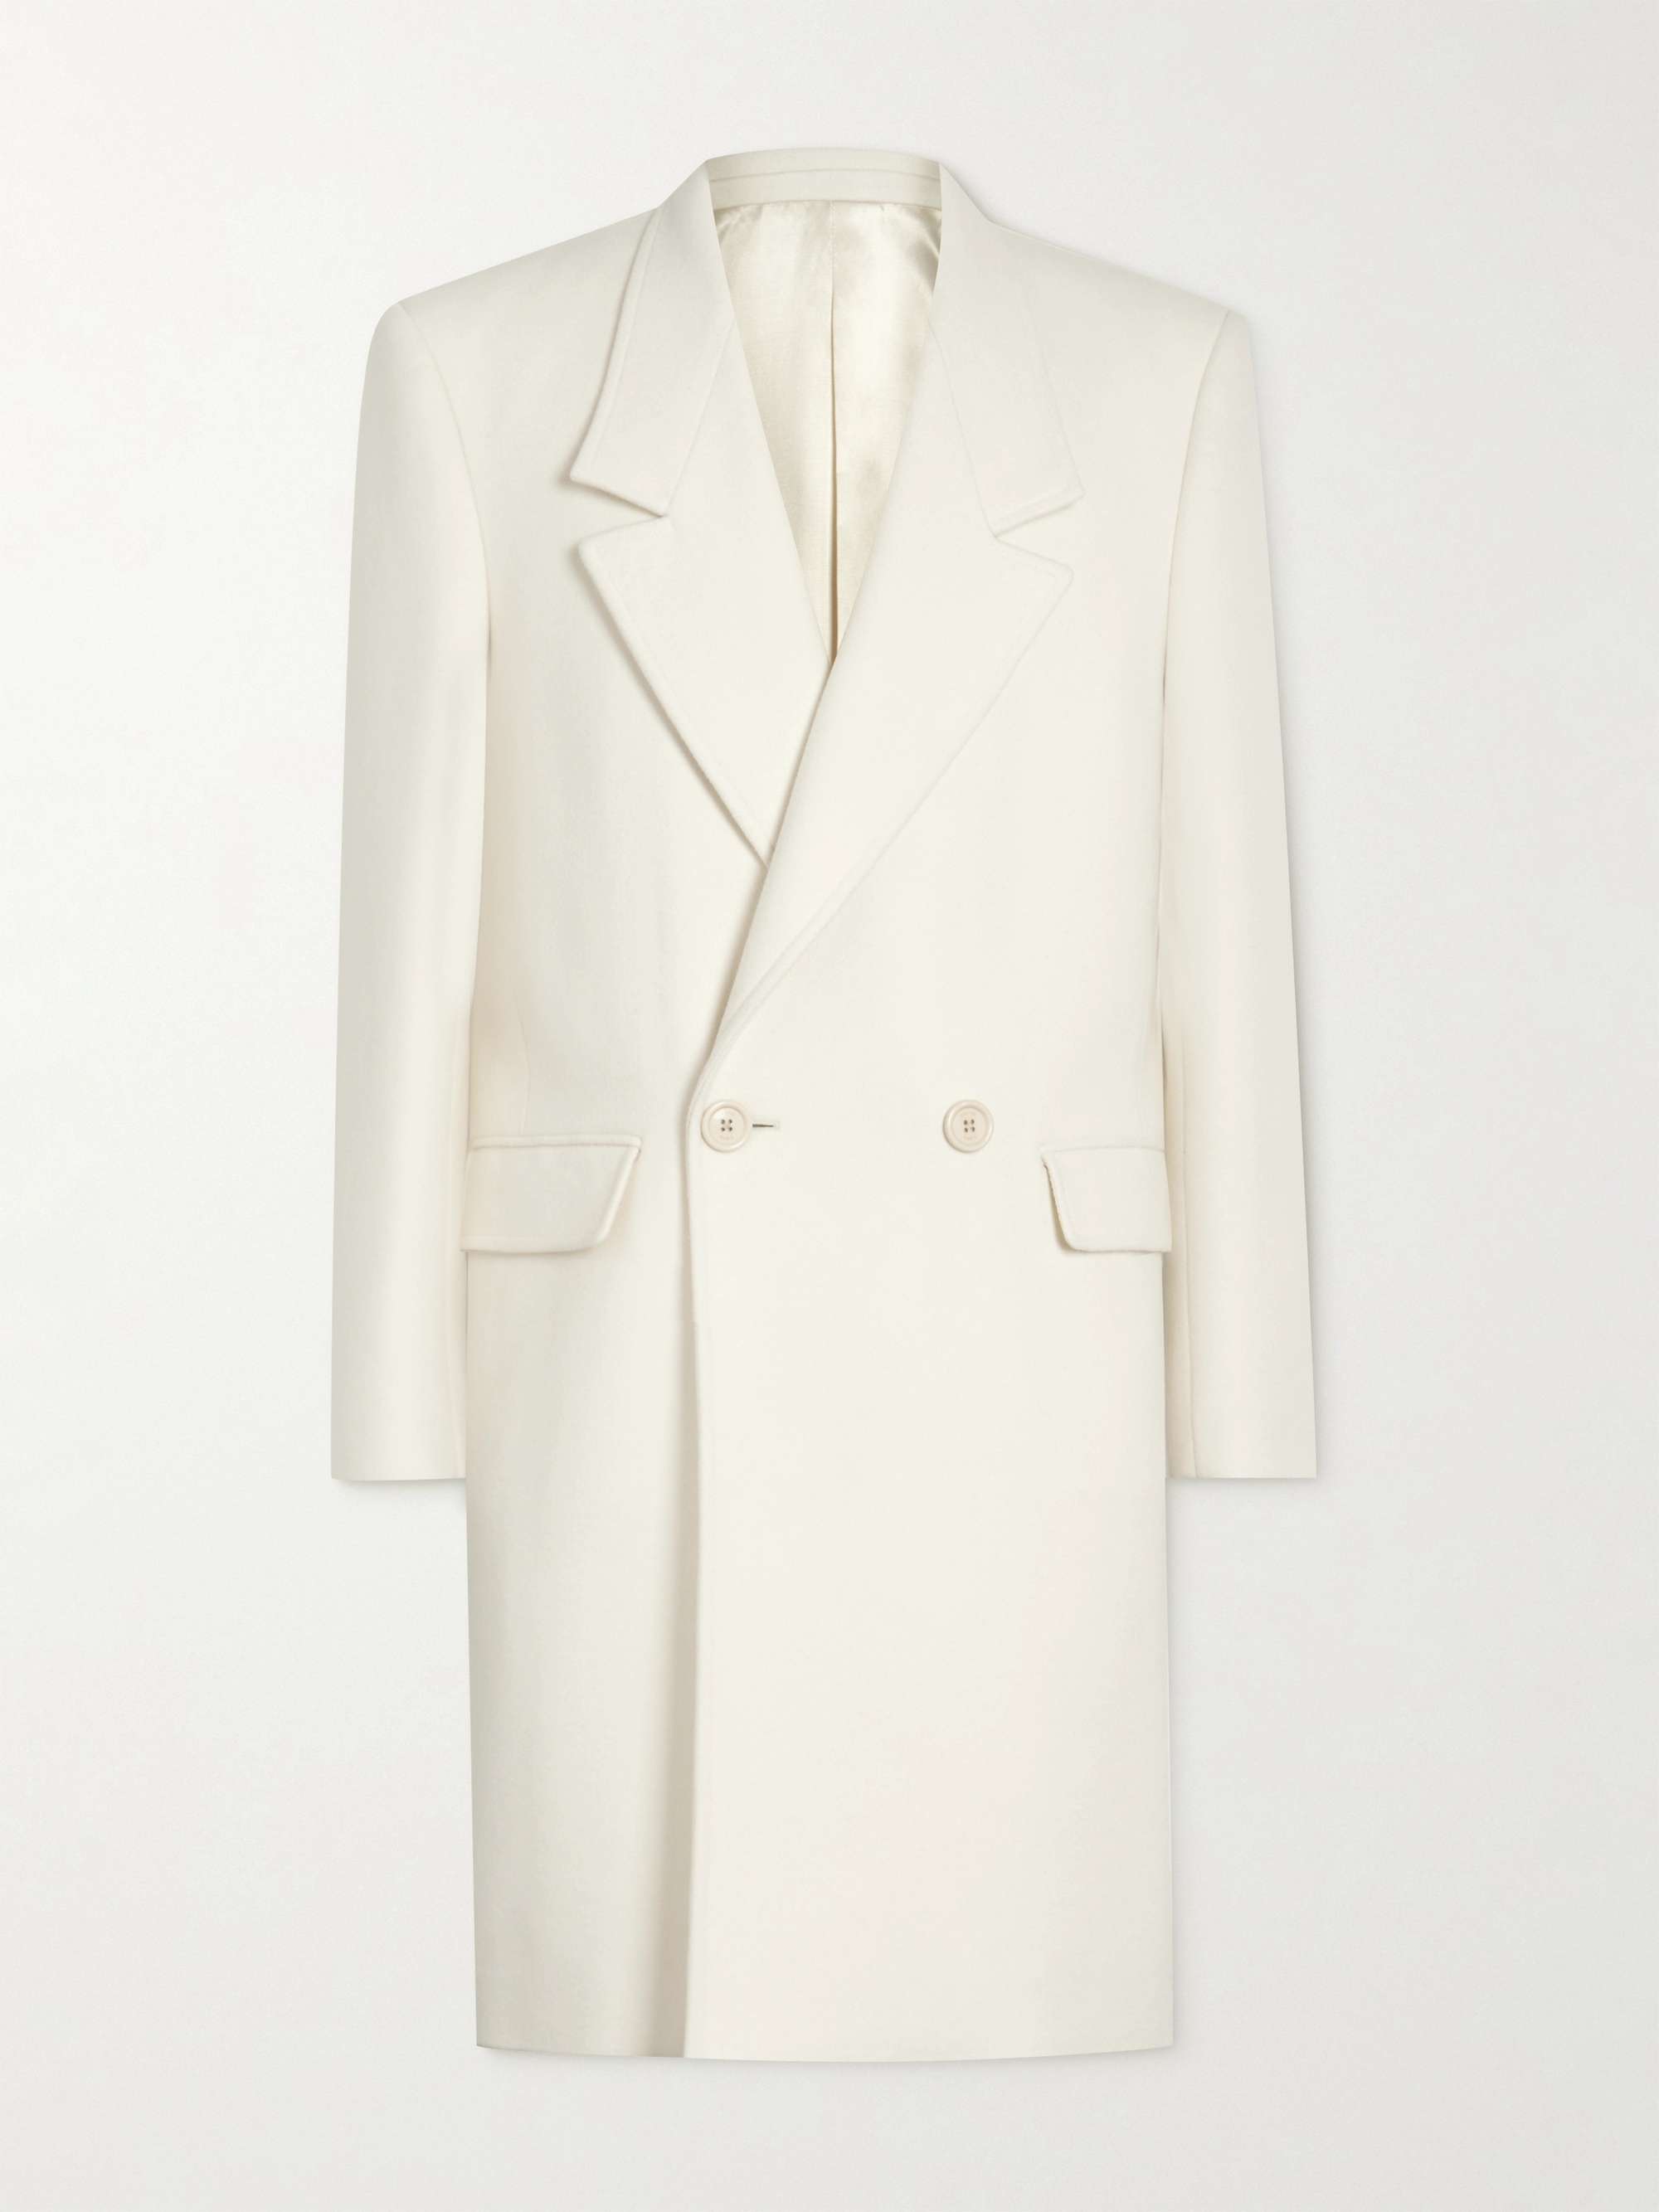 CELINE HOMME Double-Breasted Cashmere Coat